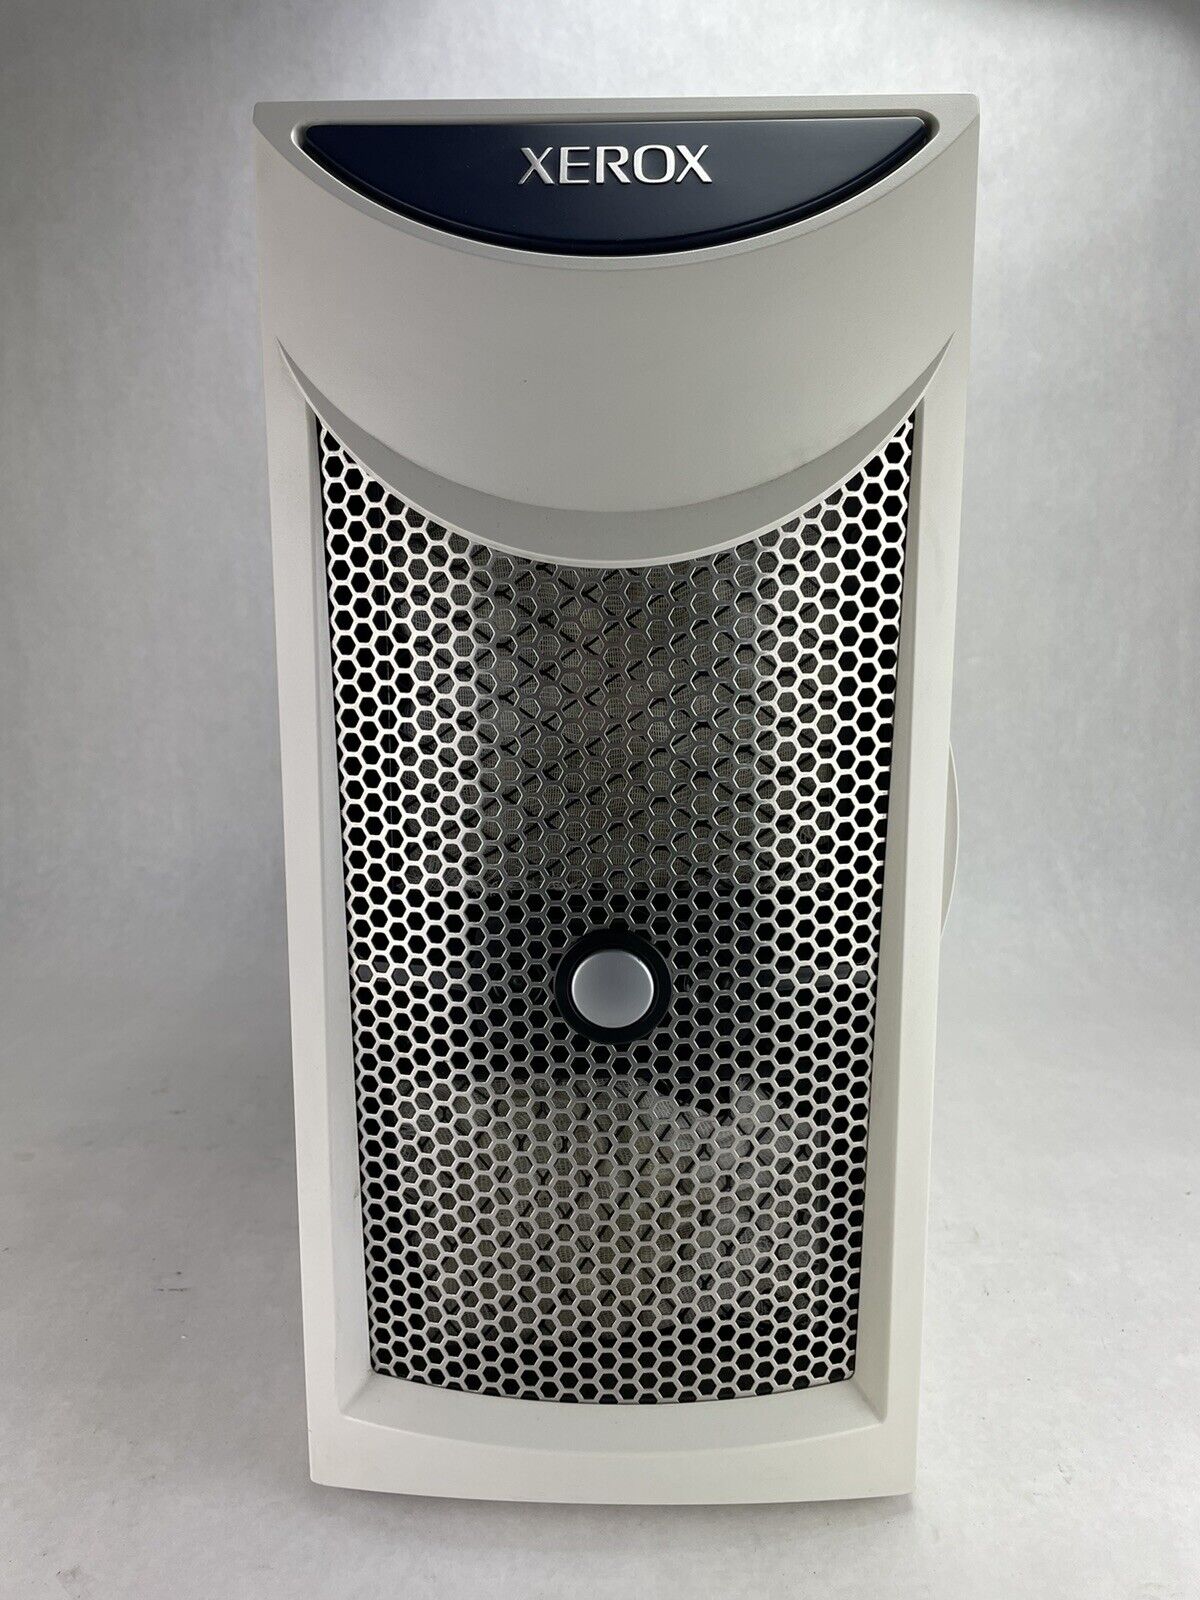 Xerox Mid Tower Computer Case w/Emacs HP2-640P 460w Power Supply